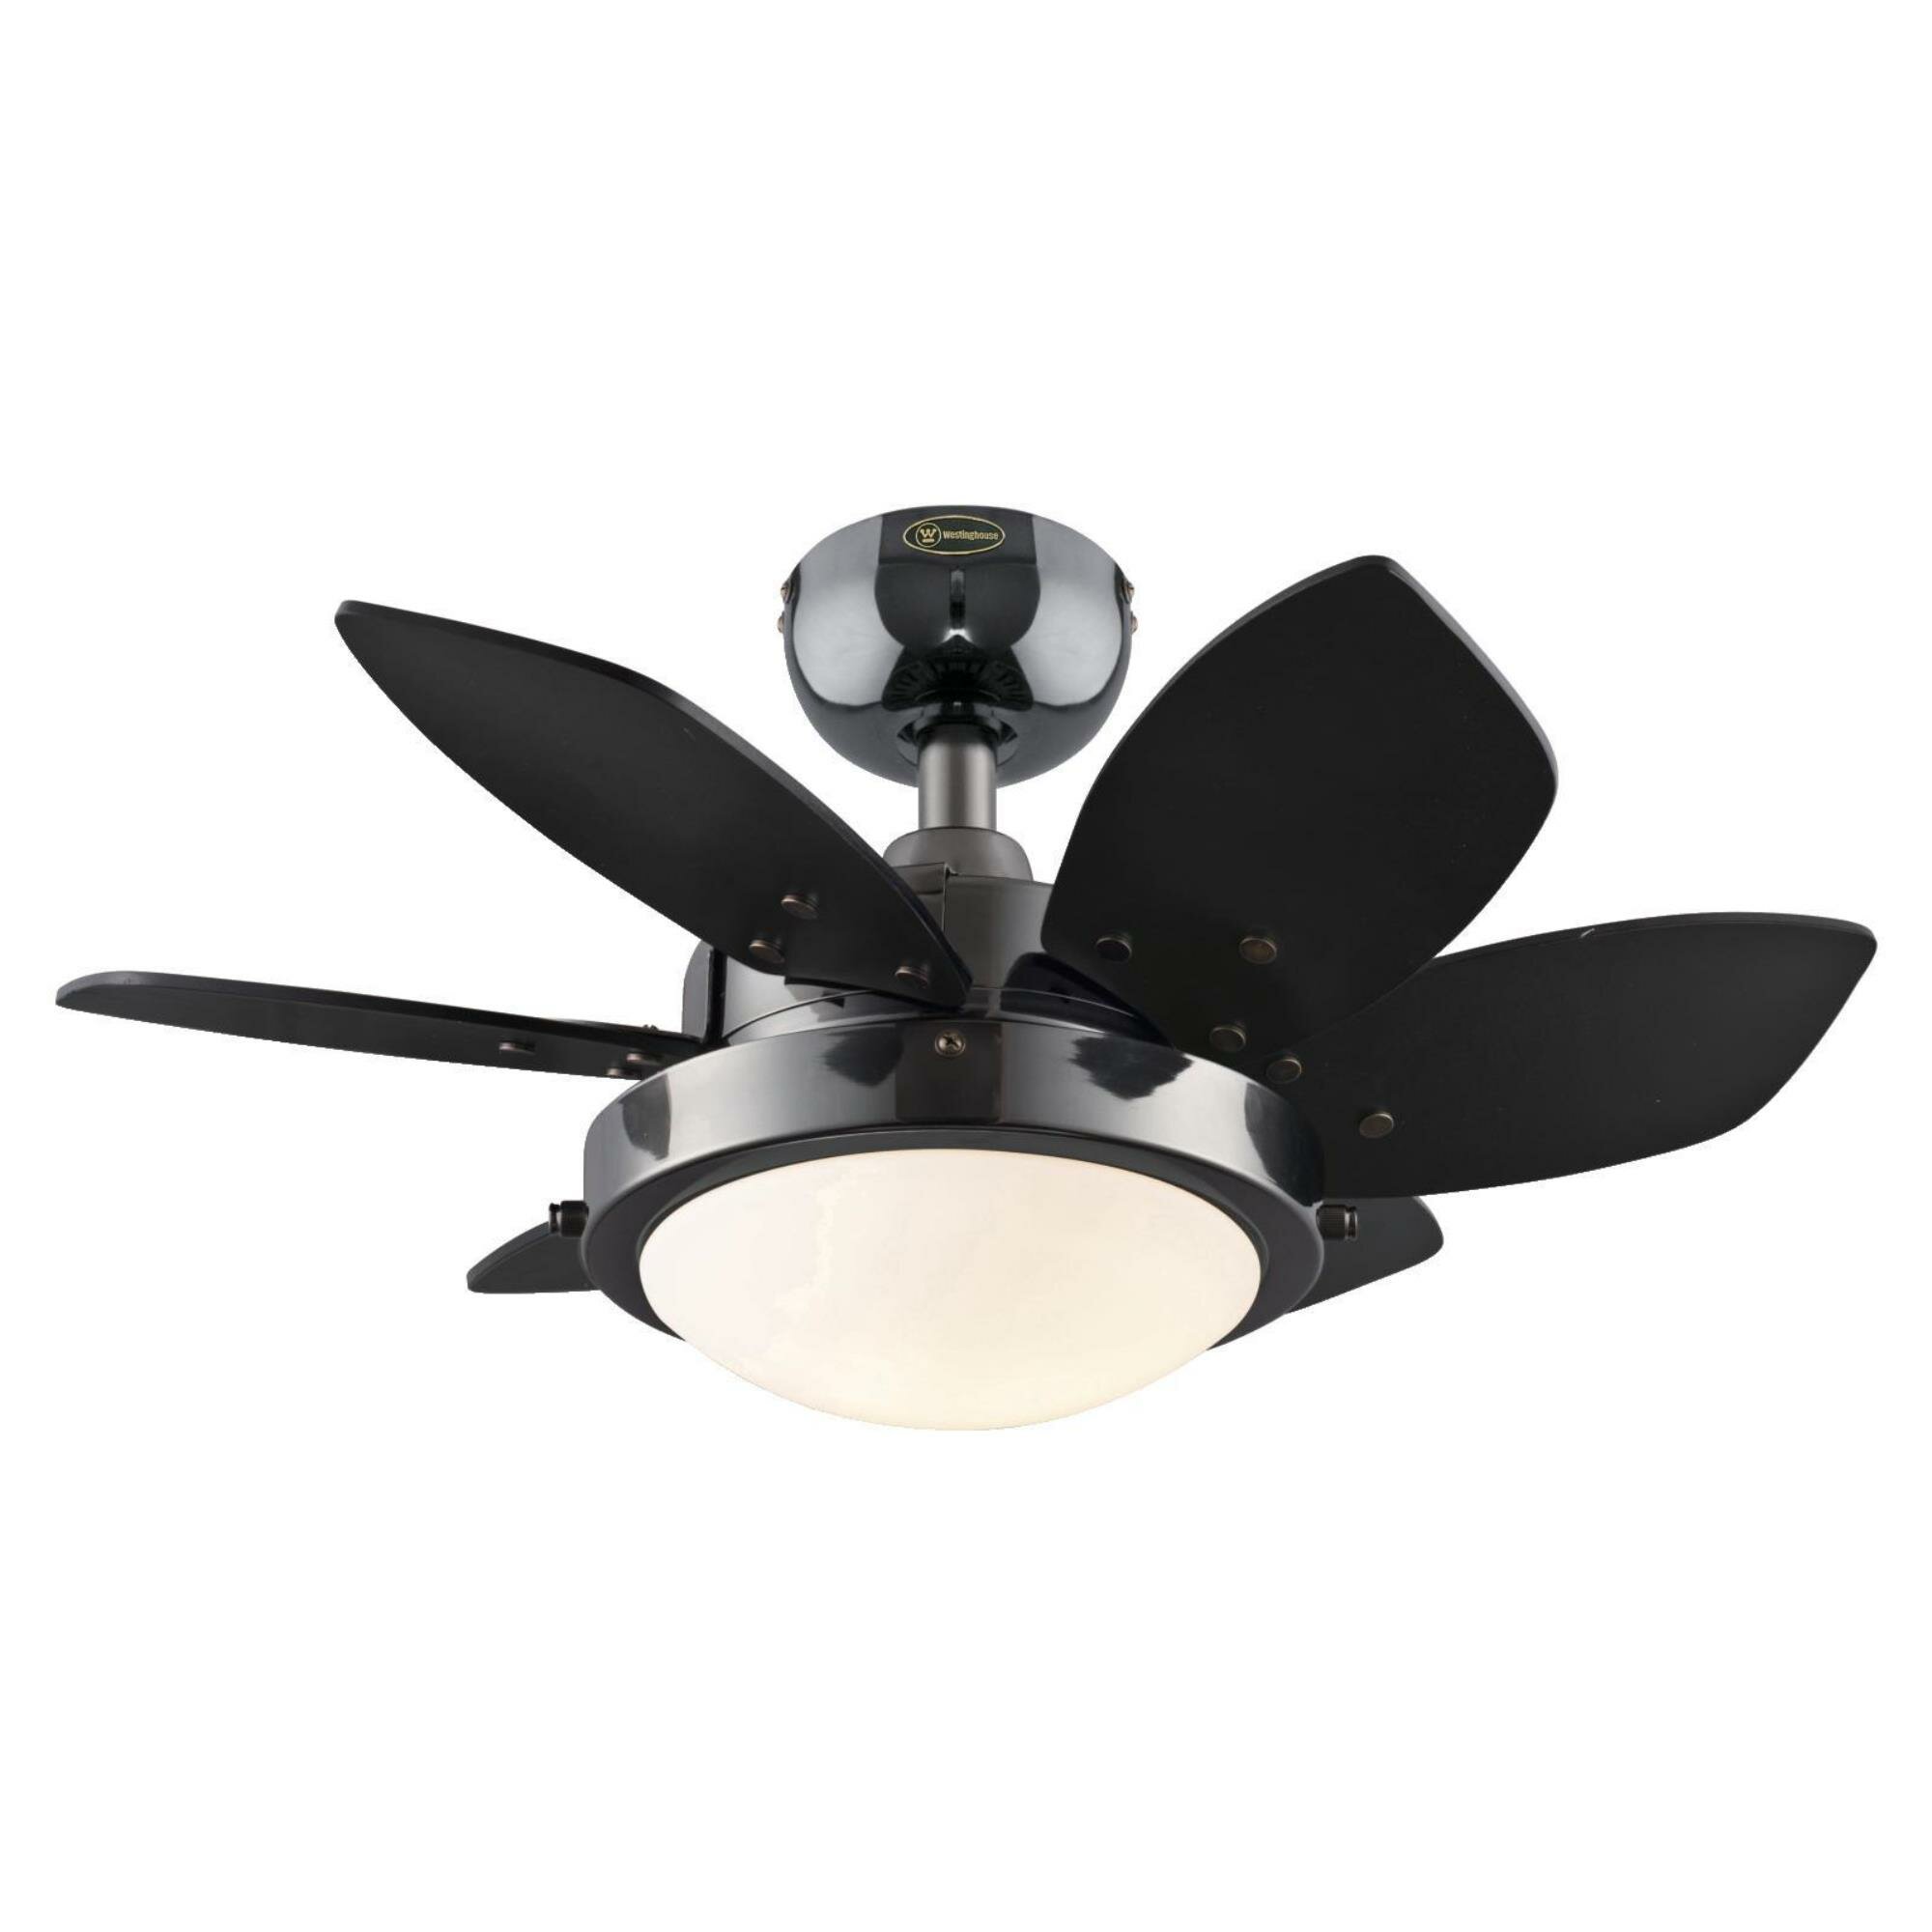 Ebern Designs 24 Sigtuna 6 Blade Led Leaf Blade Ceiling Fan With Pull Chain And Light Kit Included Reviews Wayfair